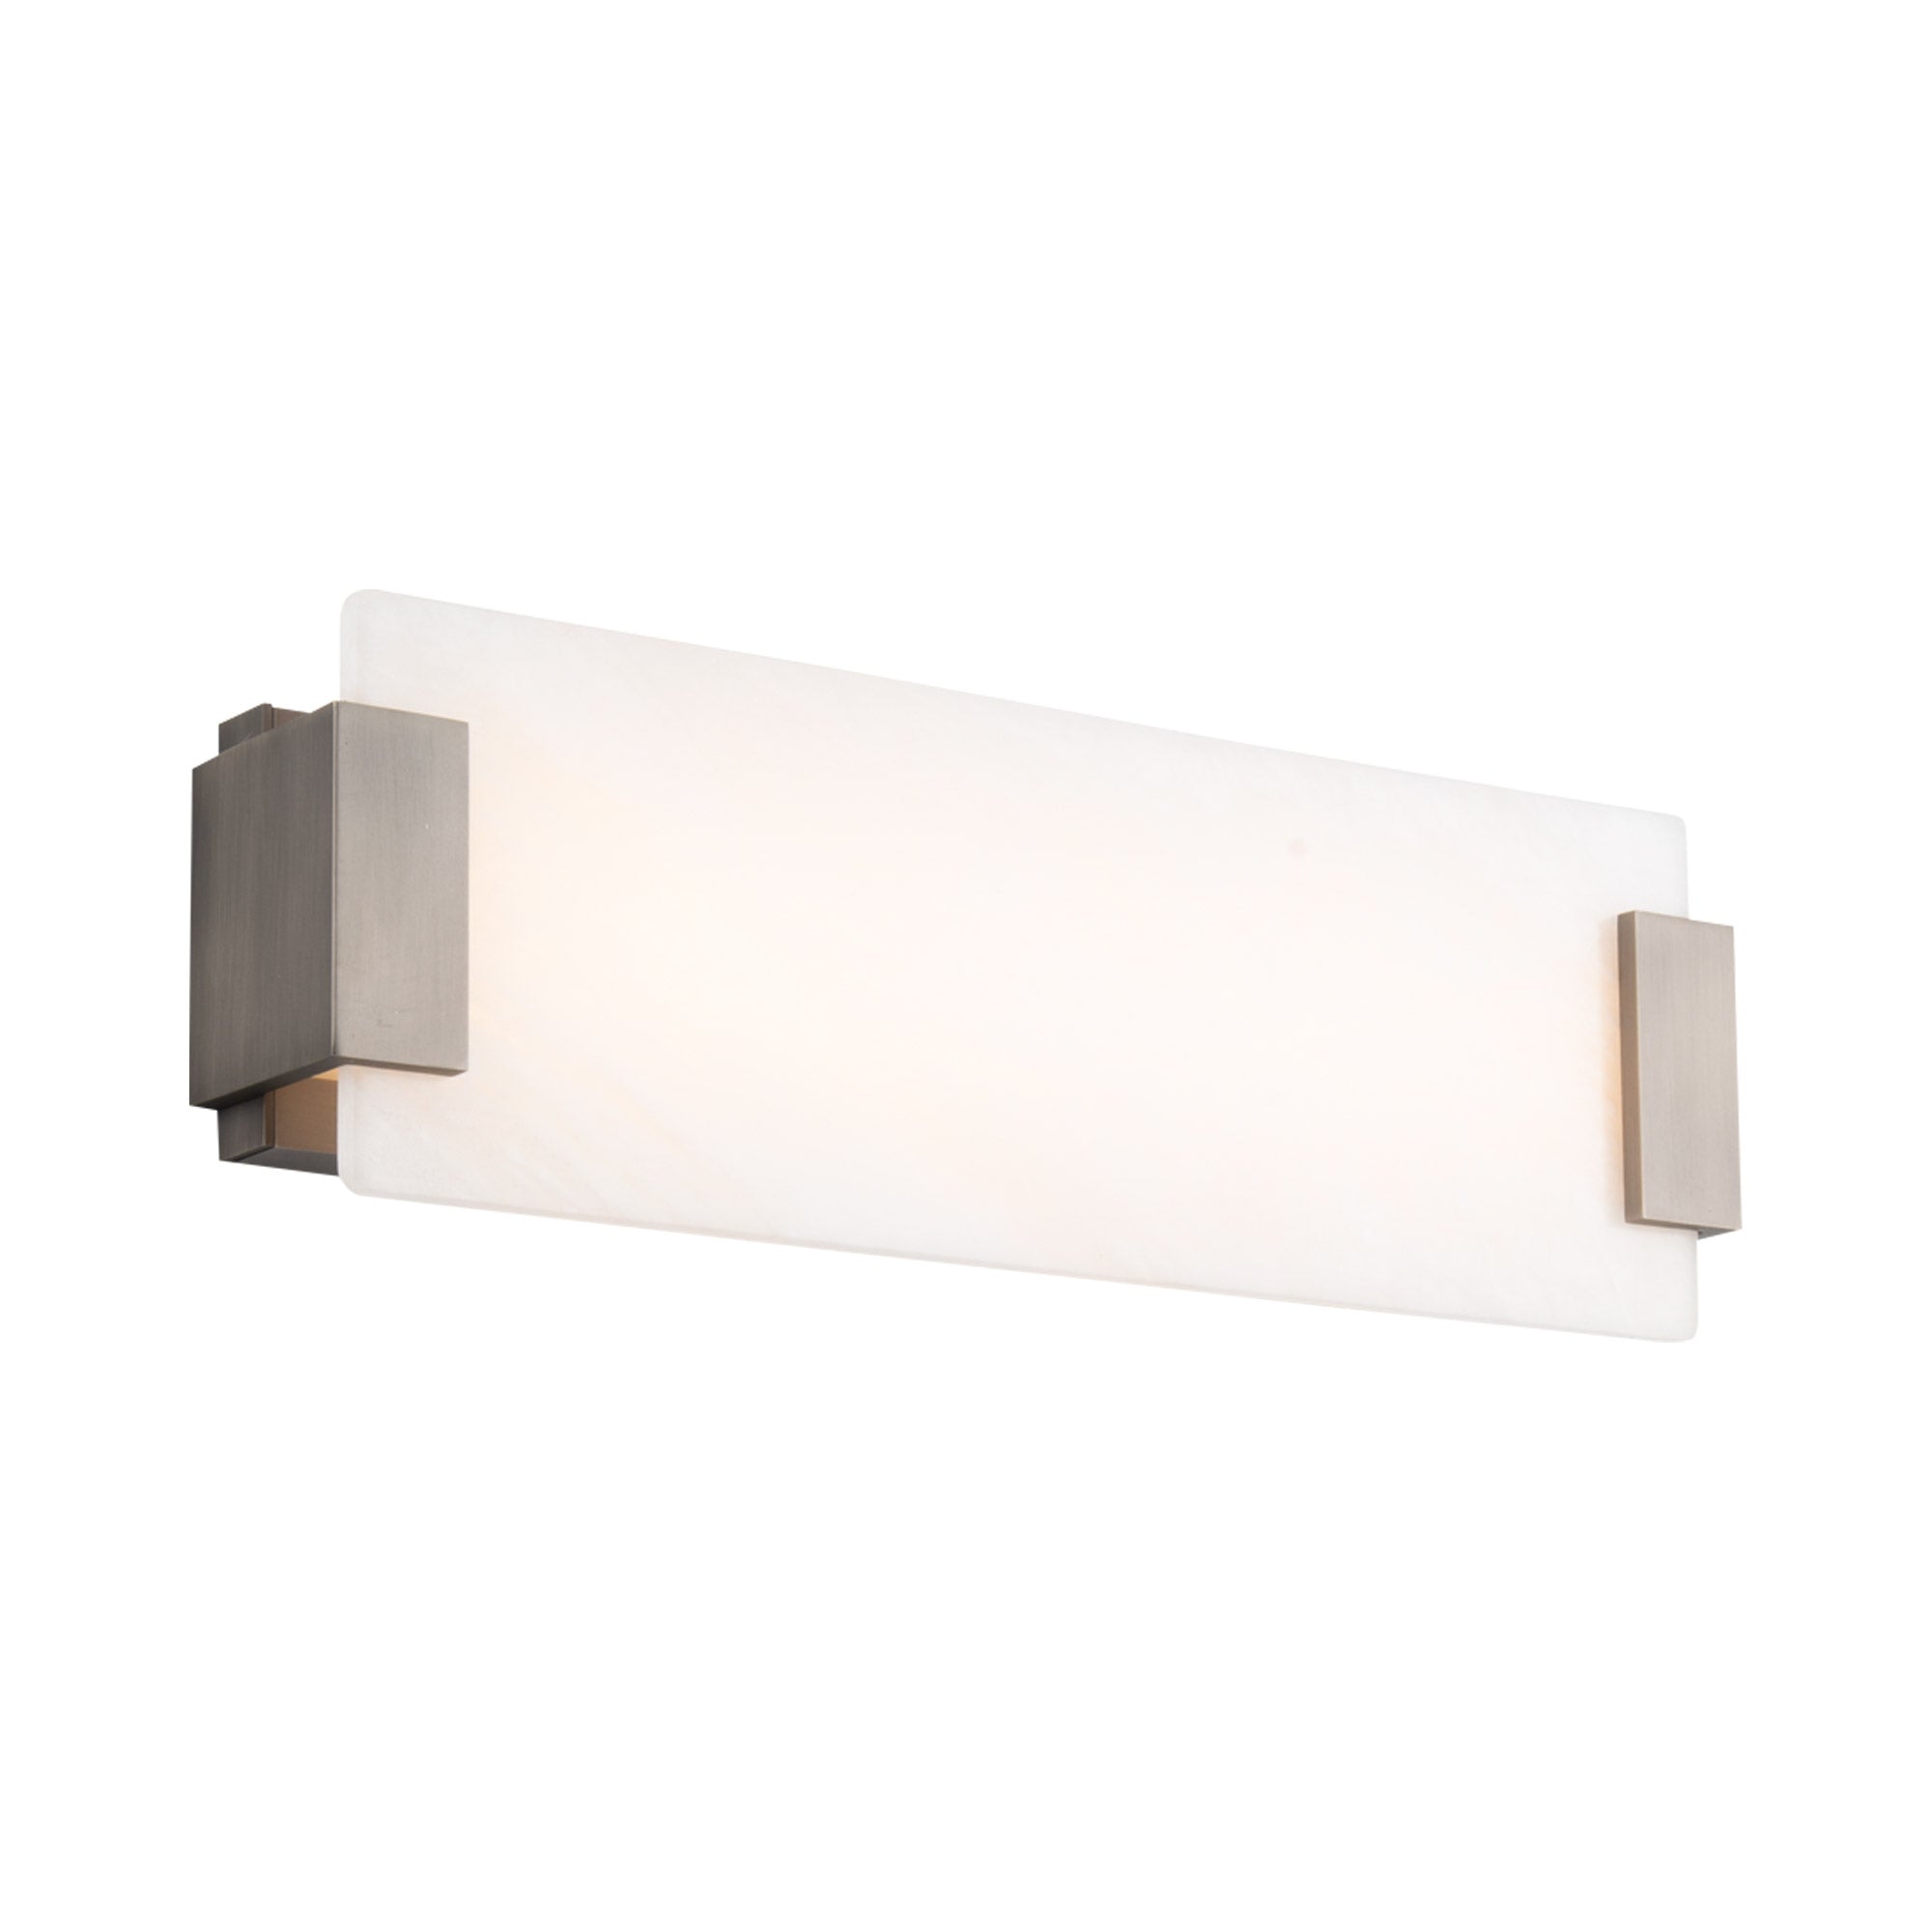 QUARRY Bathroom sconce Nickel INTEGRATED LED - WS-60018-BN | MODERN FORMS